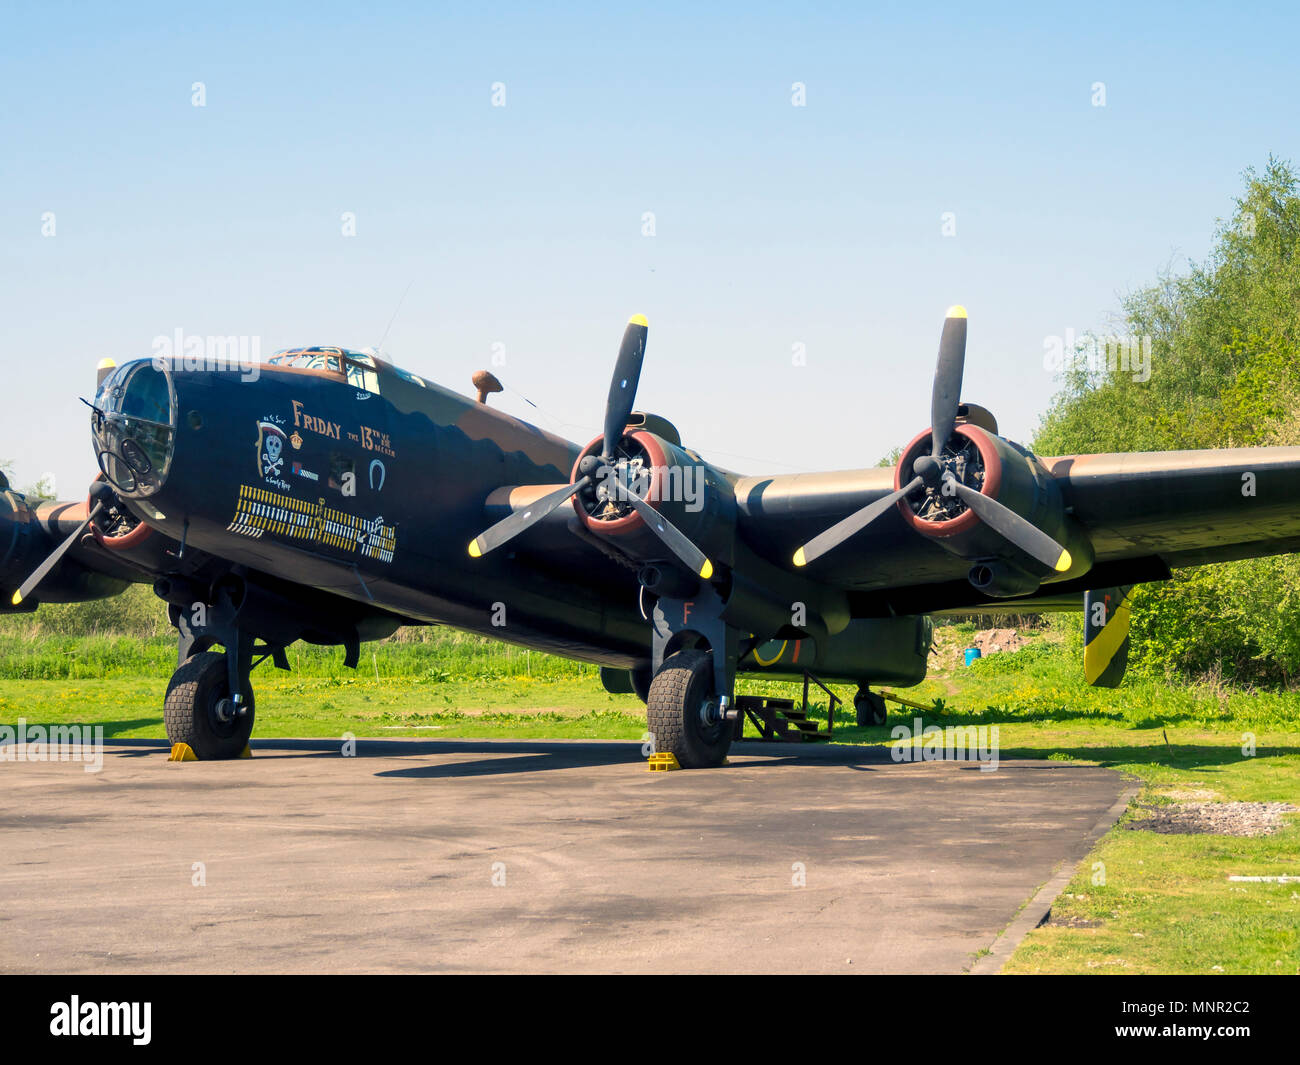 Handley Page Halifax heavy bomber in allied service during World War two on display at the Yorkshire Air Museum Elvington York UK Stock Photo